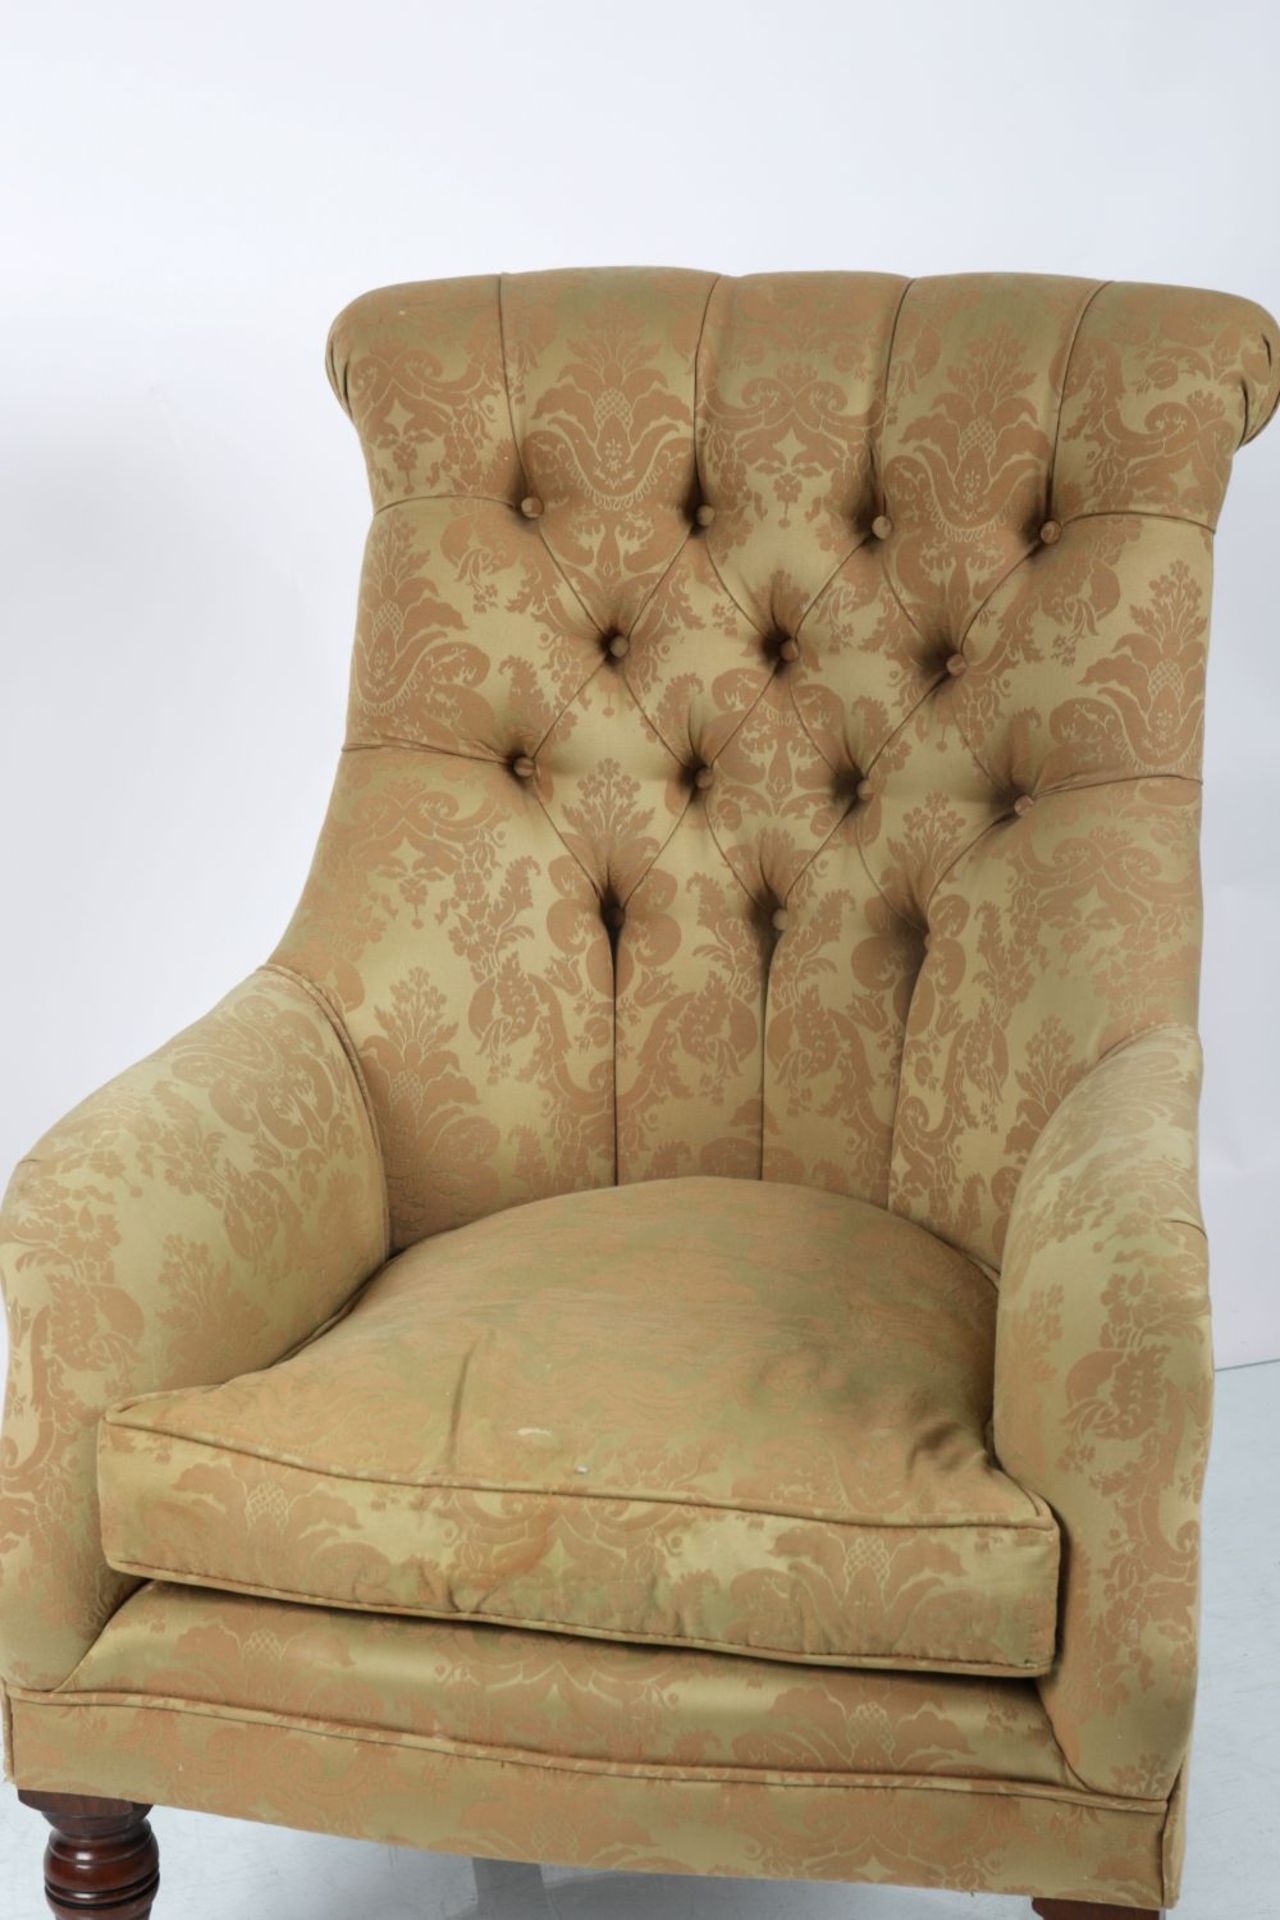 VICTORIAN STYLE UPHOLSTERED ARMCHAIR - Image 3 of 3